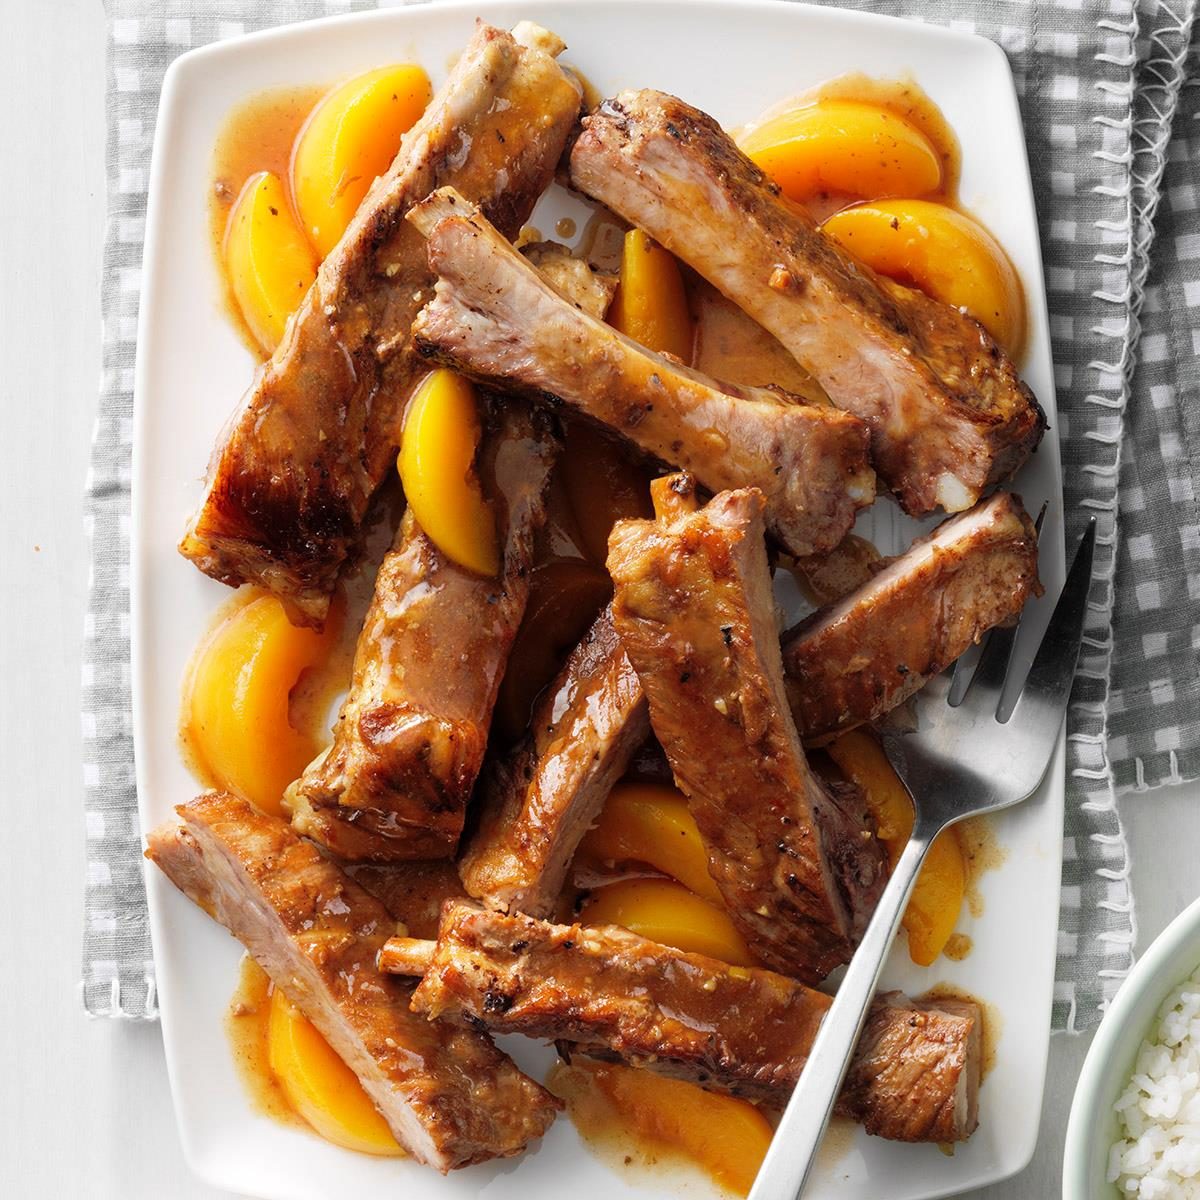 Day 1: Slow-Cooked Peachy Spareribs